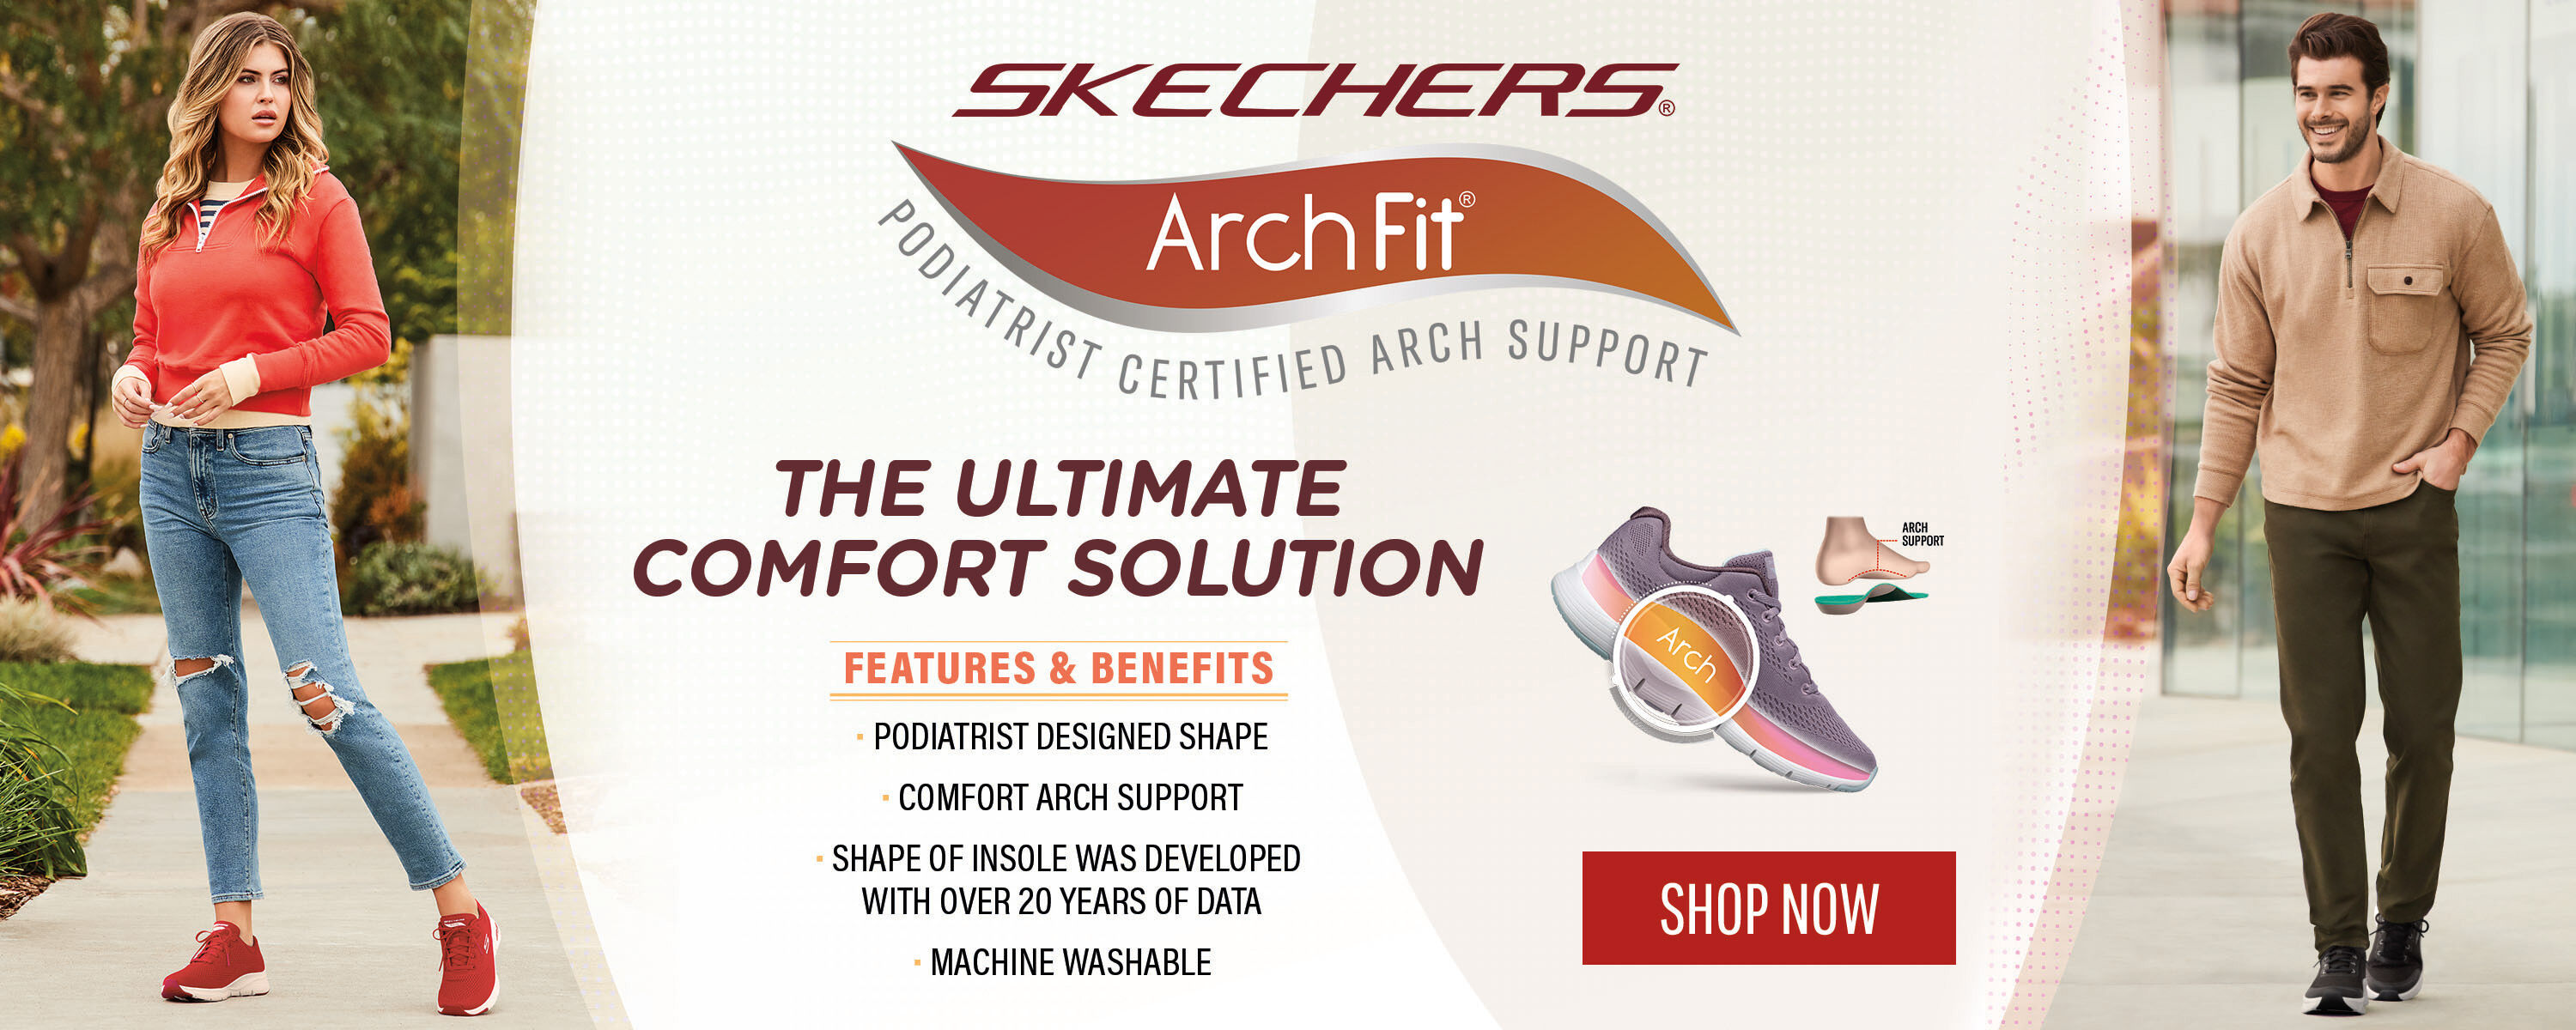 Skechers Arch Fit - The Ultimate Comfort Solution - Shop Now